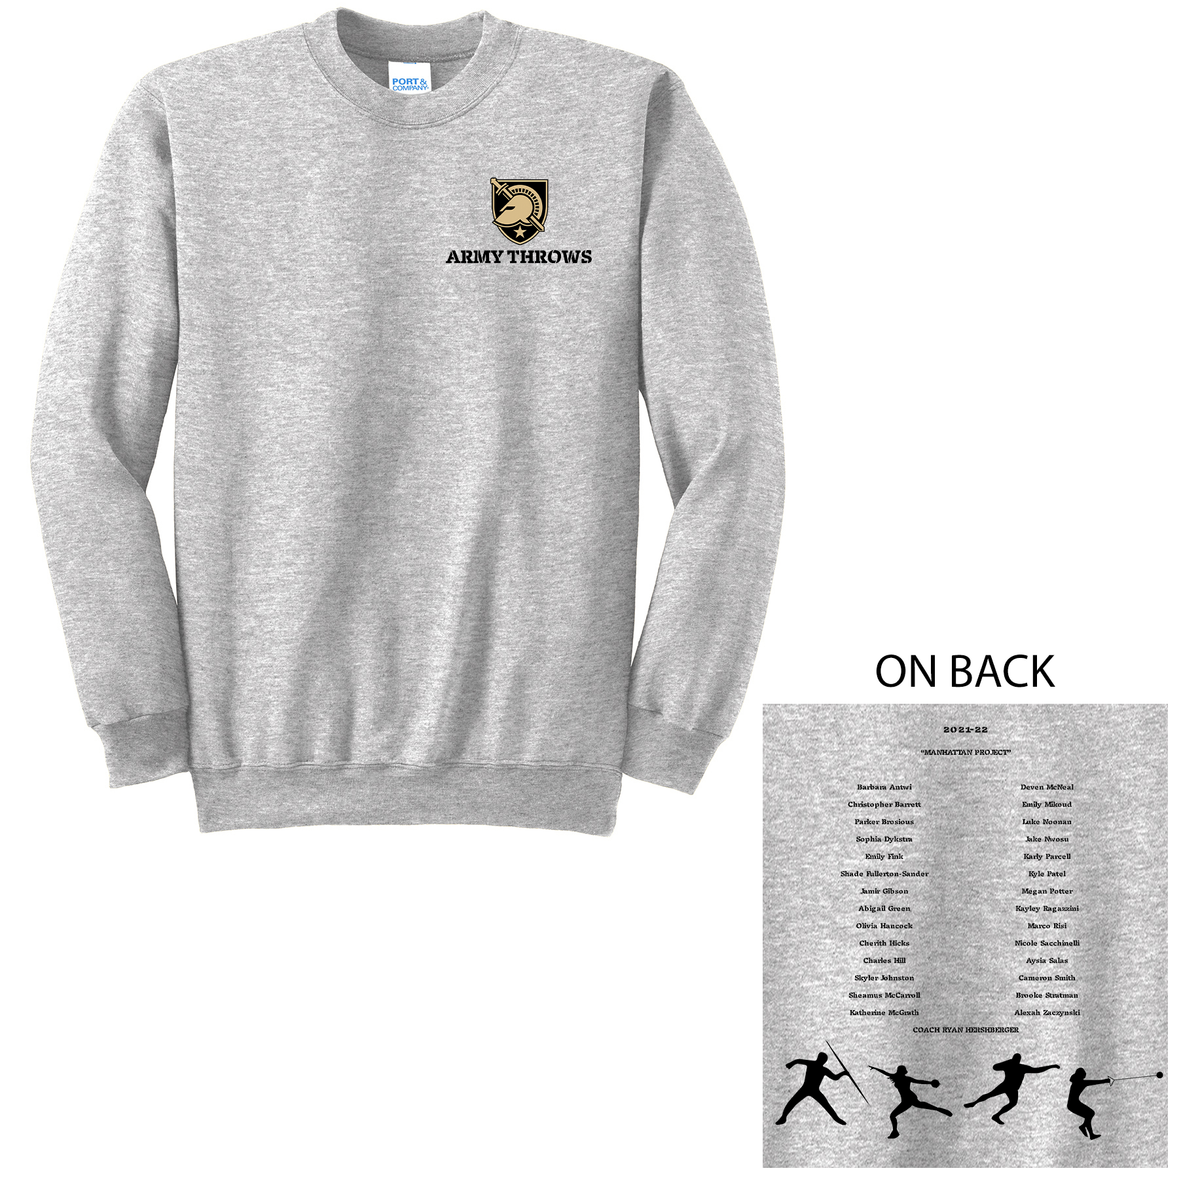 Army Throws Crew Neck Sweater